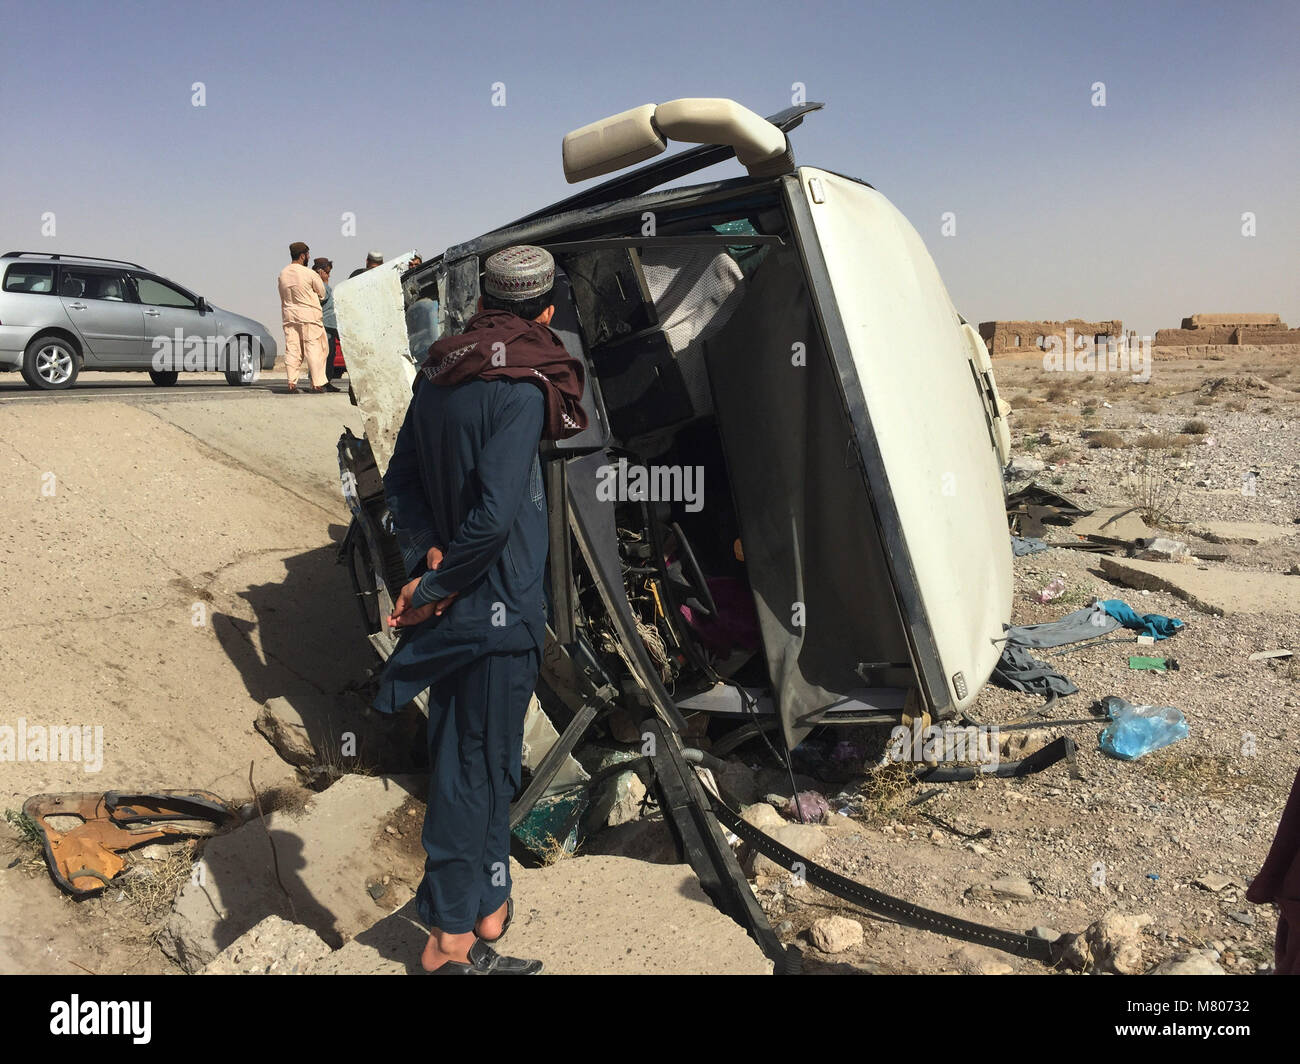 Kandahar, Afghanistan. 14th Mar, 2018. A man stands in front of the damaged passenger bus at a road accident site in Kandahar province, Afghanistan, March 14, 2018. At least seven passengers lost their lives and 24 others were injured in a road accident in Kandahar province, south of Afghanistan on Wednesday, a local official said. Credit: STR/Xinhua/Alamy Live News Stock Photo